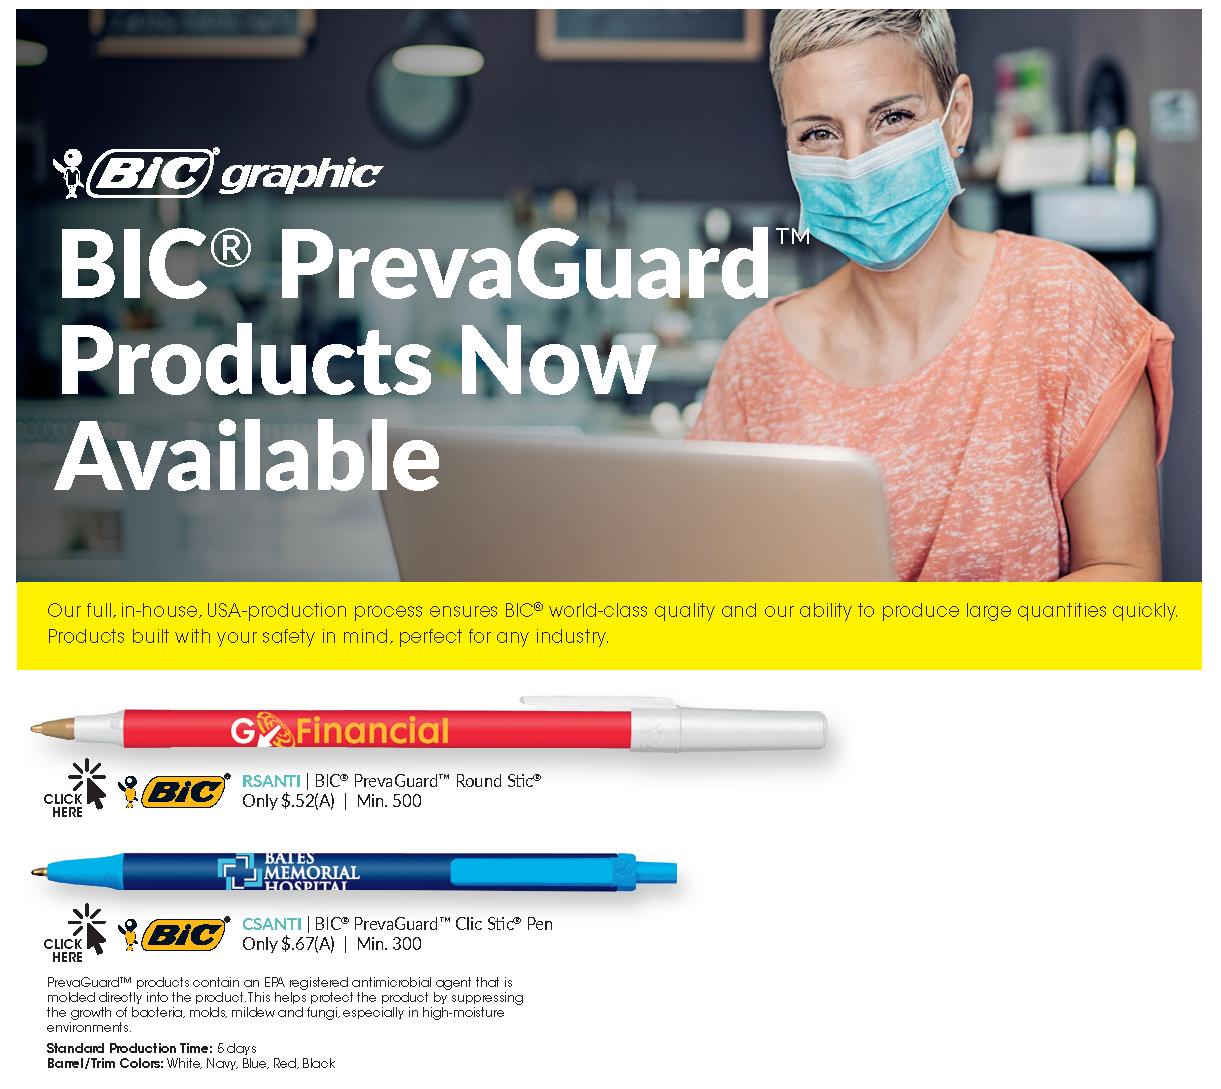 Bic-PrevaGuard-Products